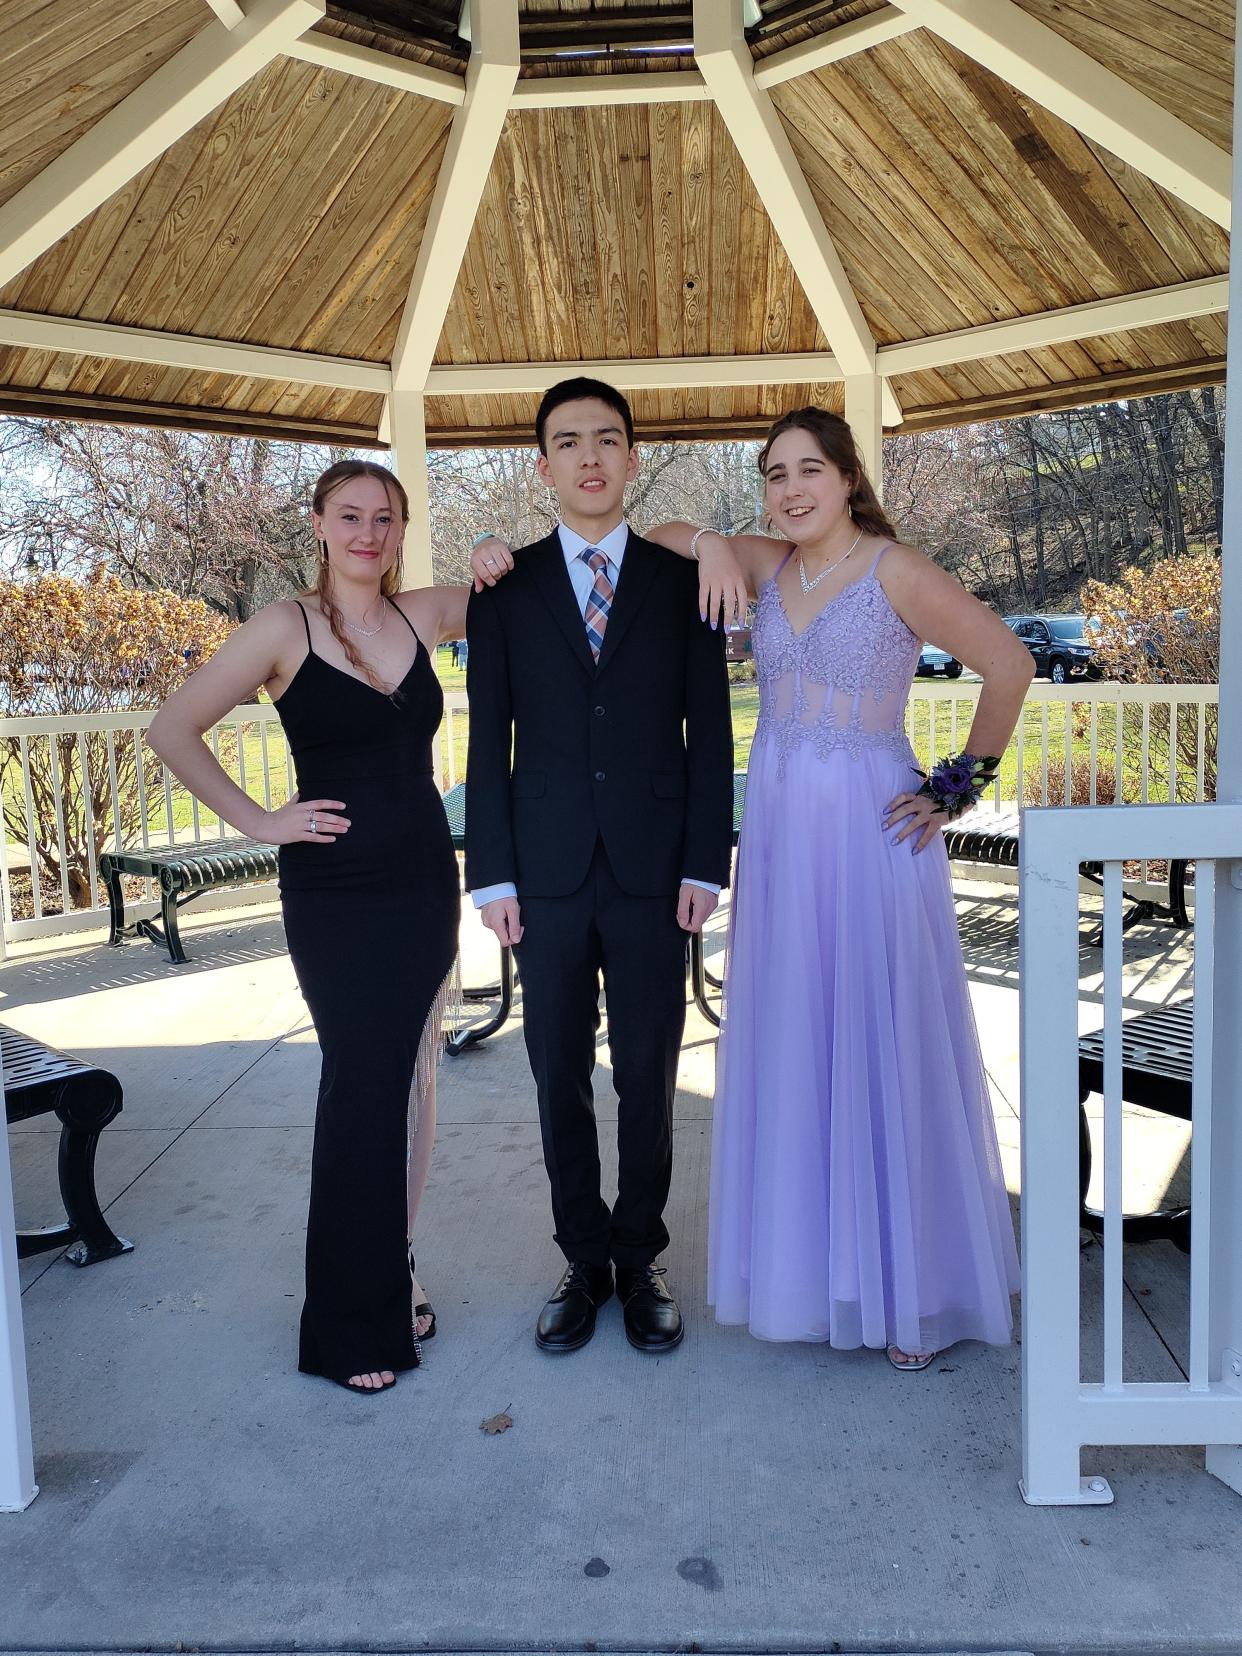 Aubrey Heinz (left), Josiah Reeves (center) and Bailey Piepenhagen pose for a photo at a pavilion before their prom on April 13 in Appleton.